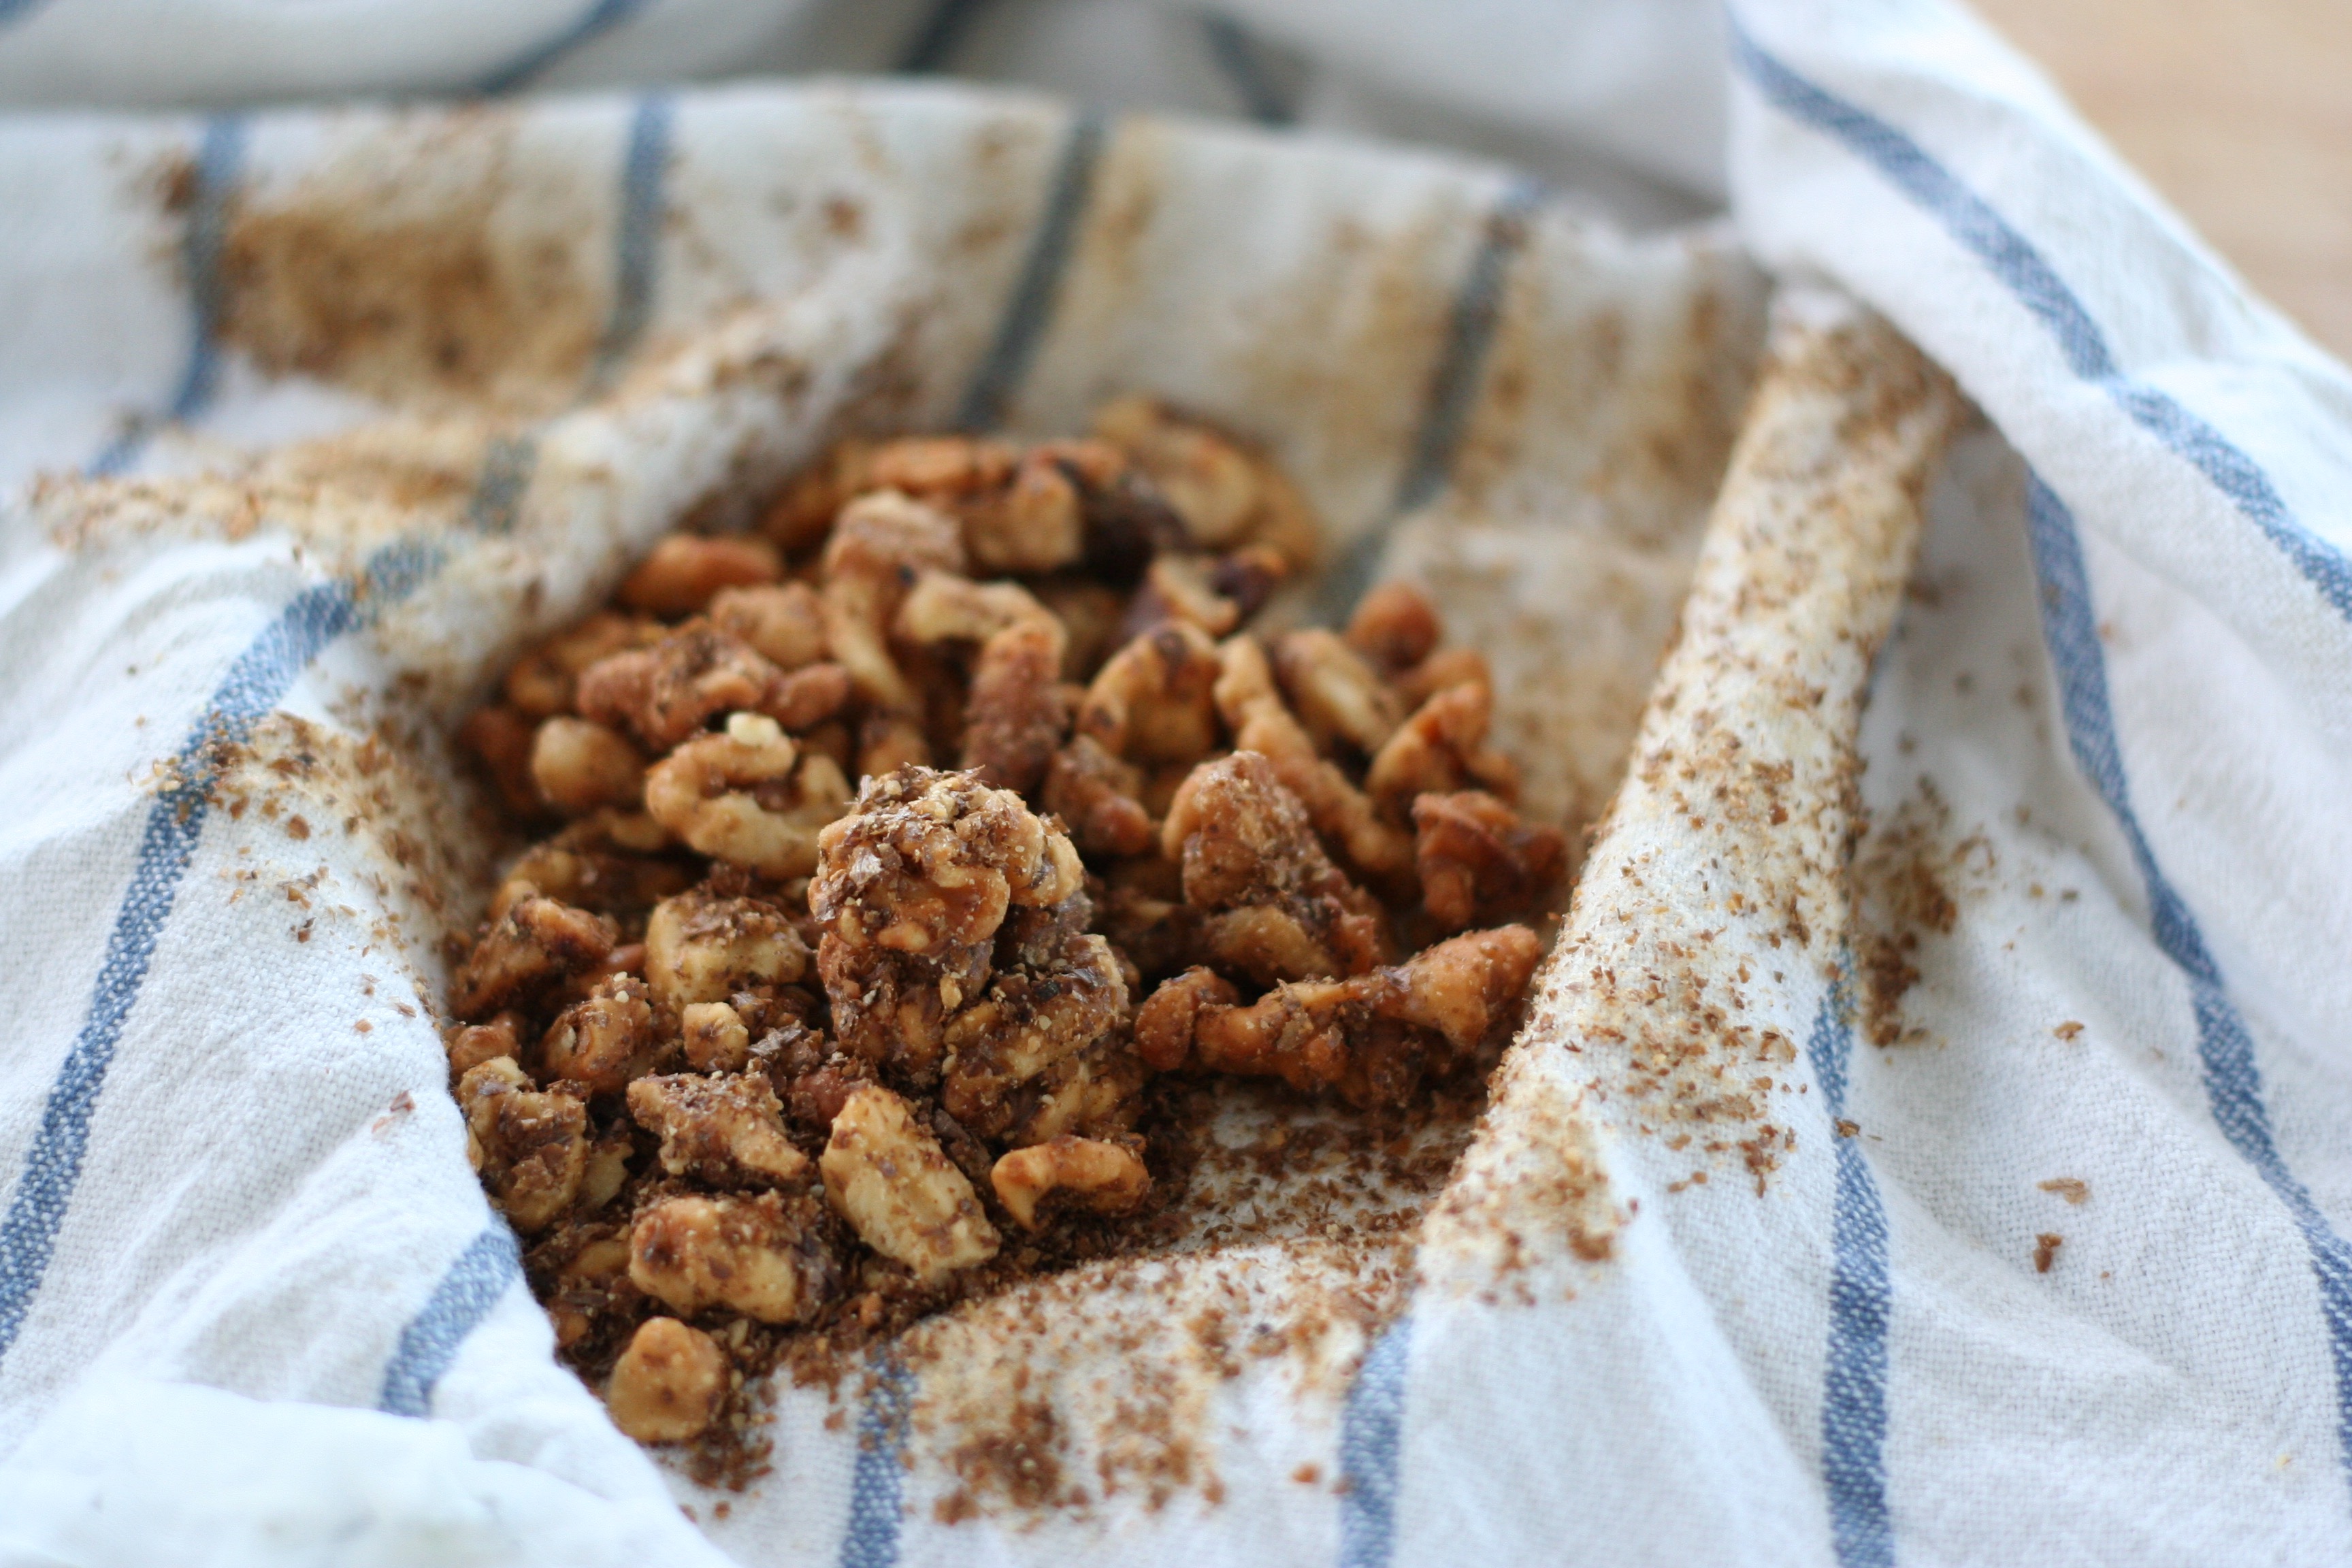 Toasted, Rubbed Walnuts